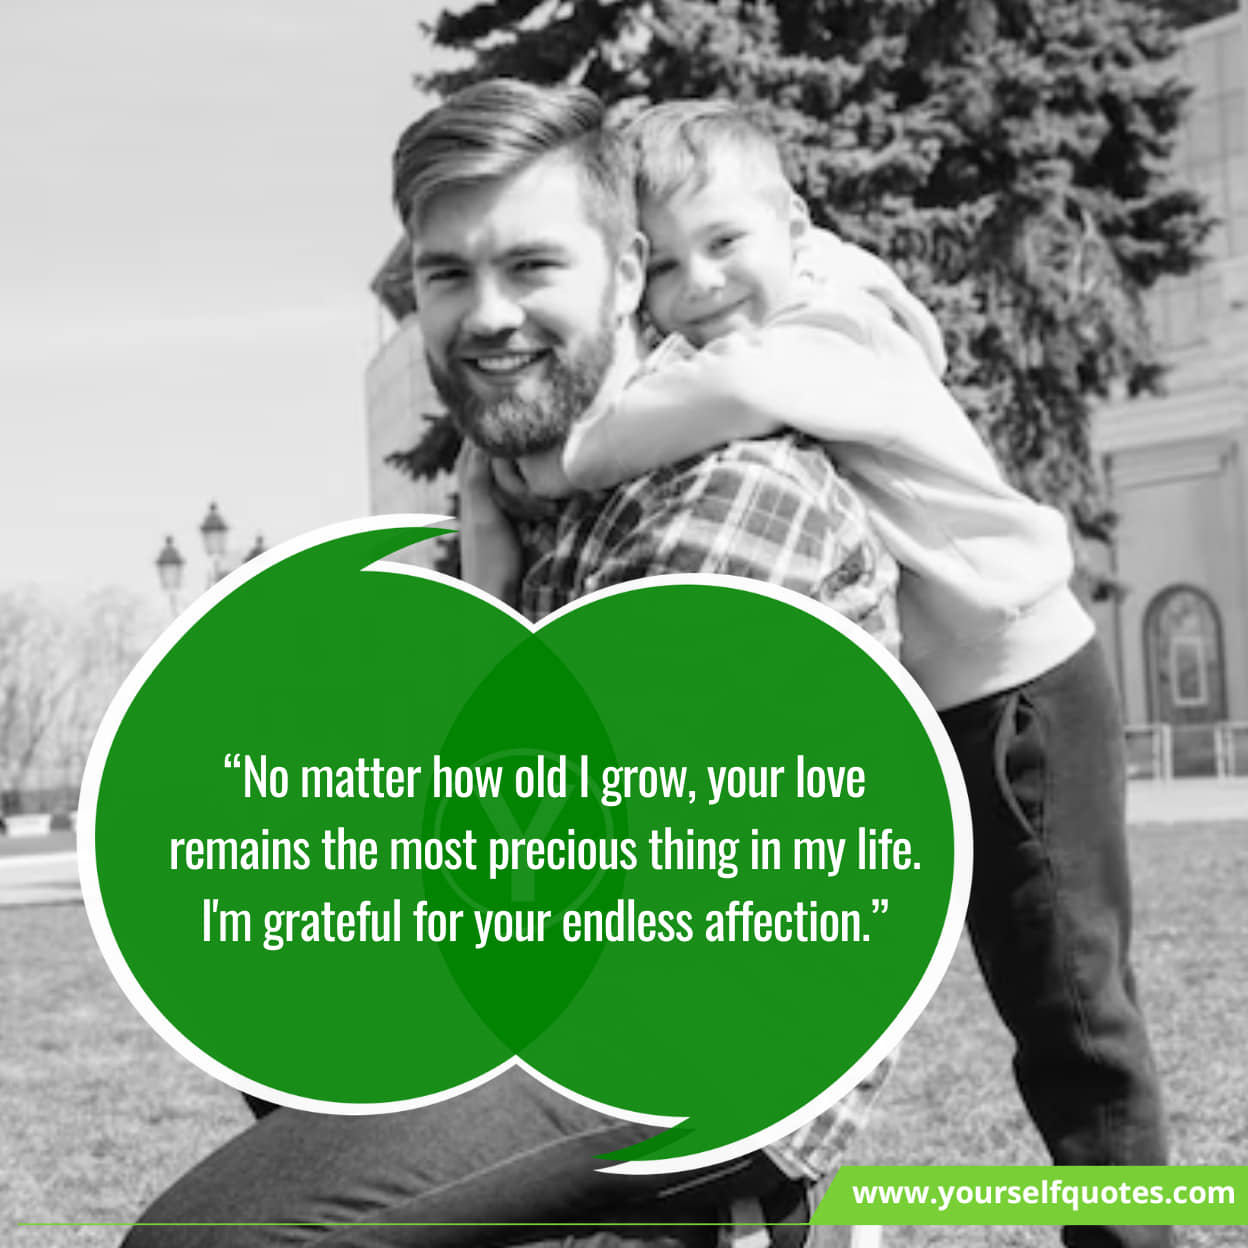 Gratitude and love Messages for dad